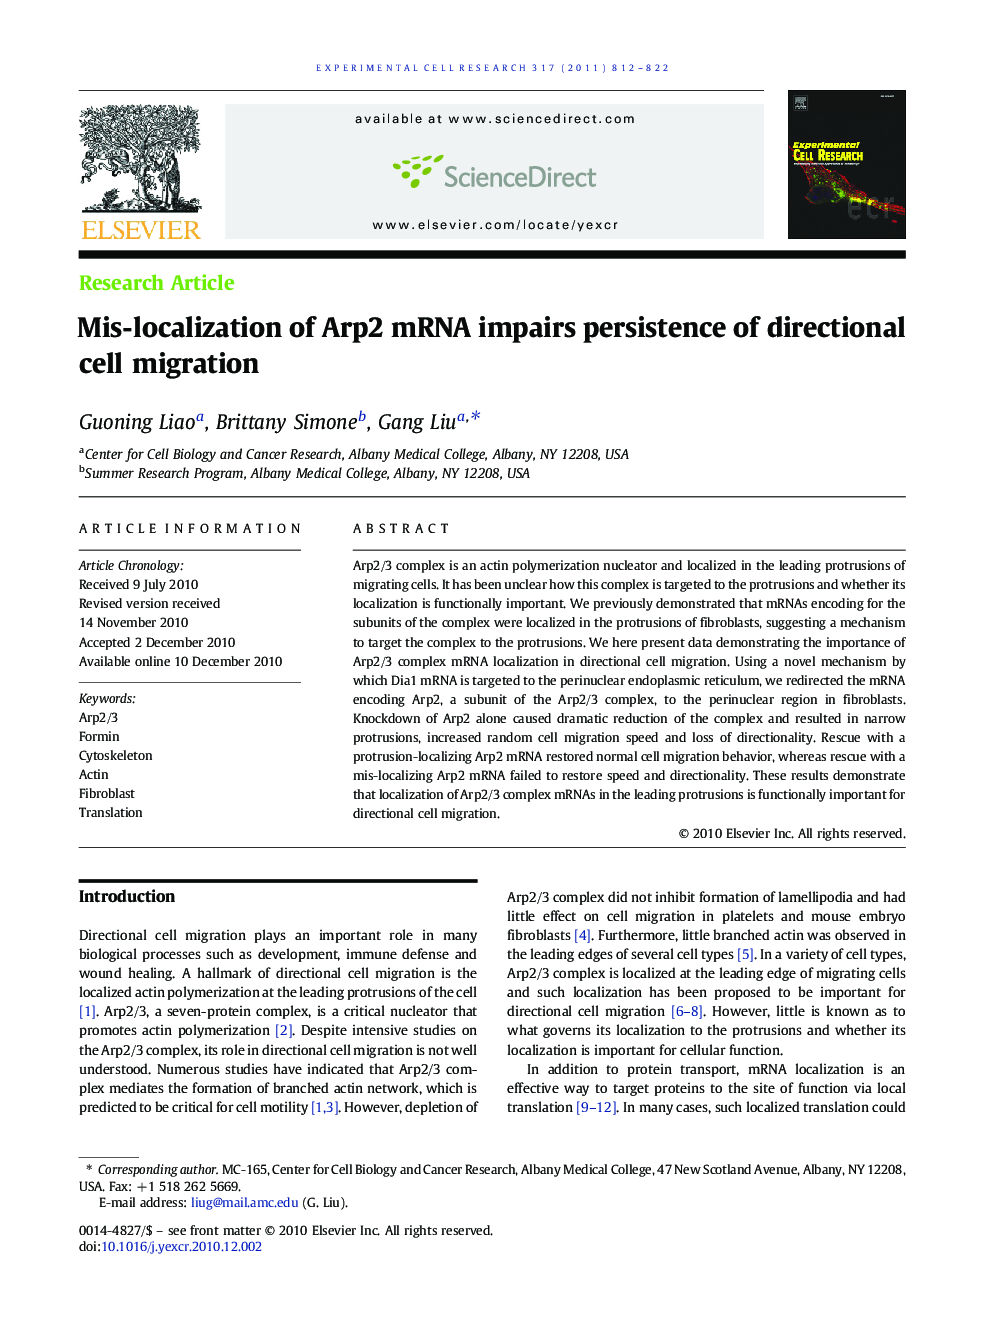 Mis-localization of Arp2 mRNA impairs persistence of directional cell migration